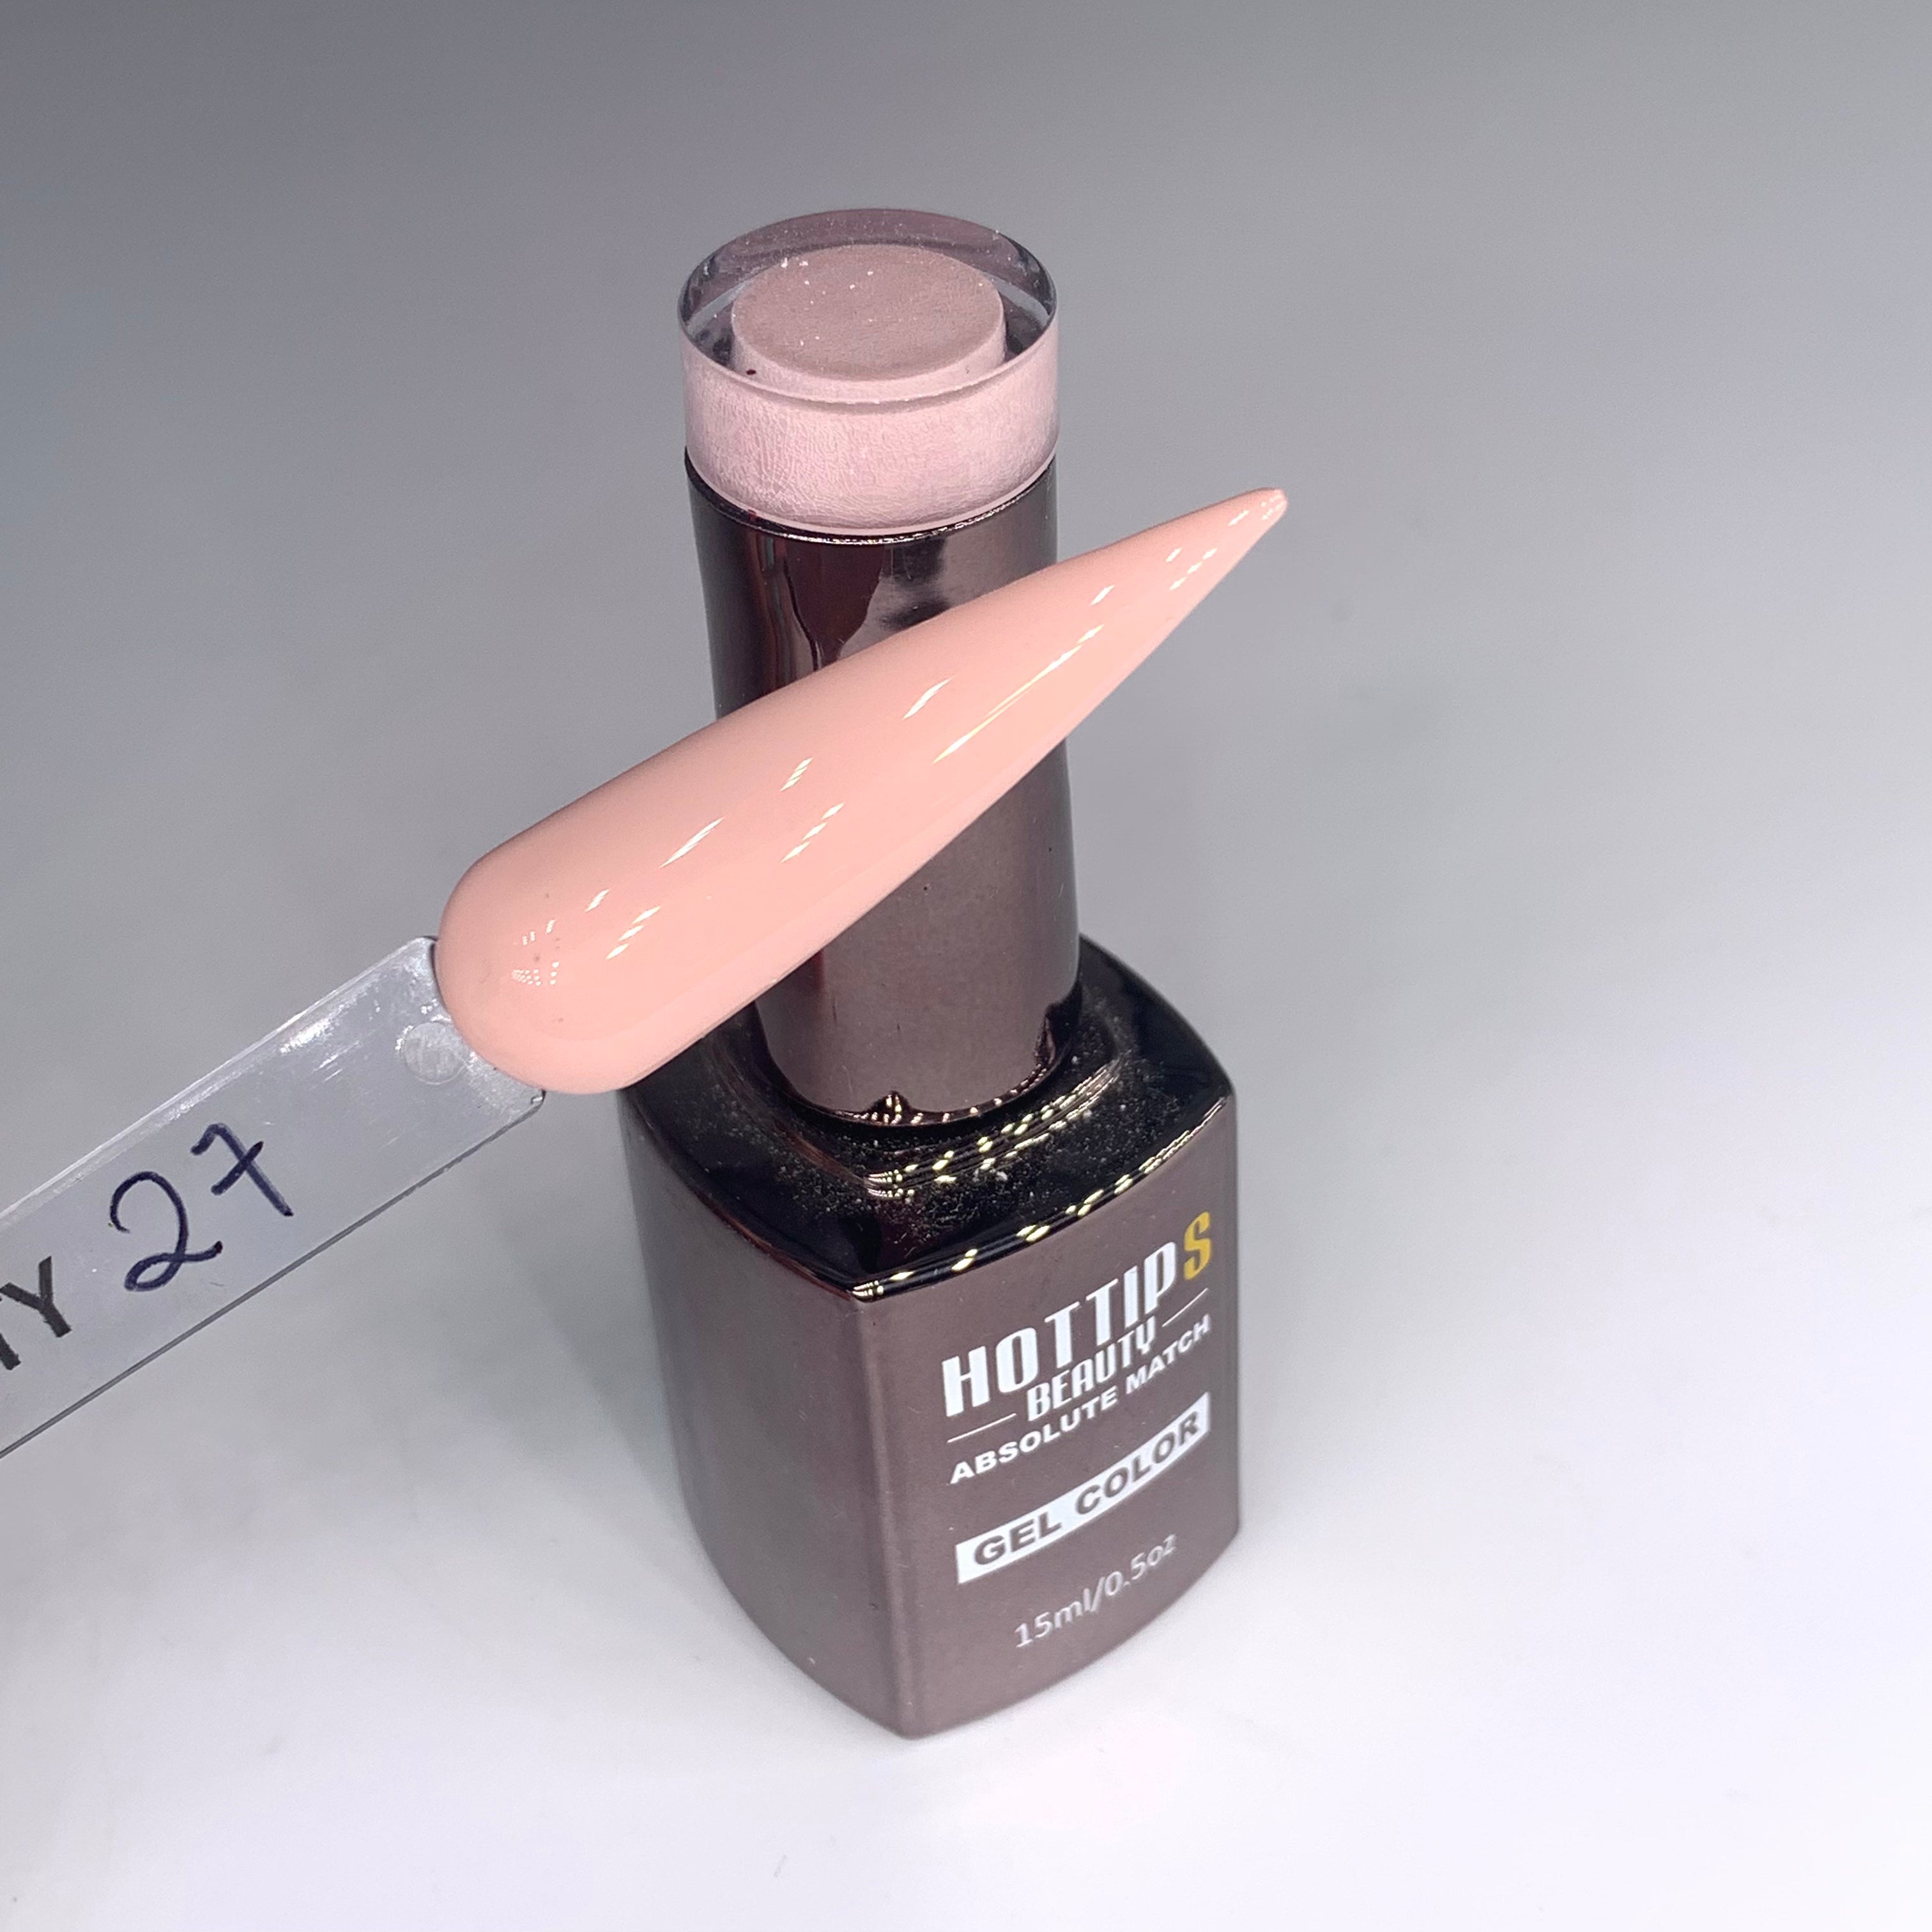 Absolute Match - 27 Perfect Cuticle